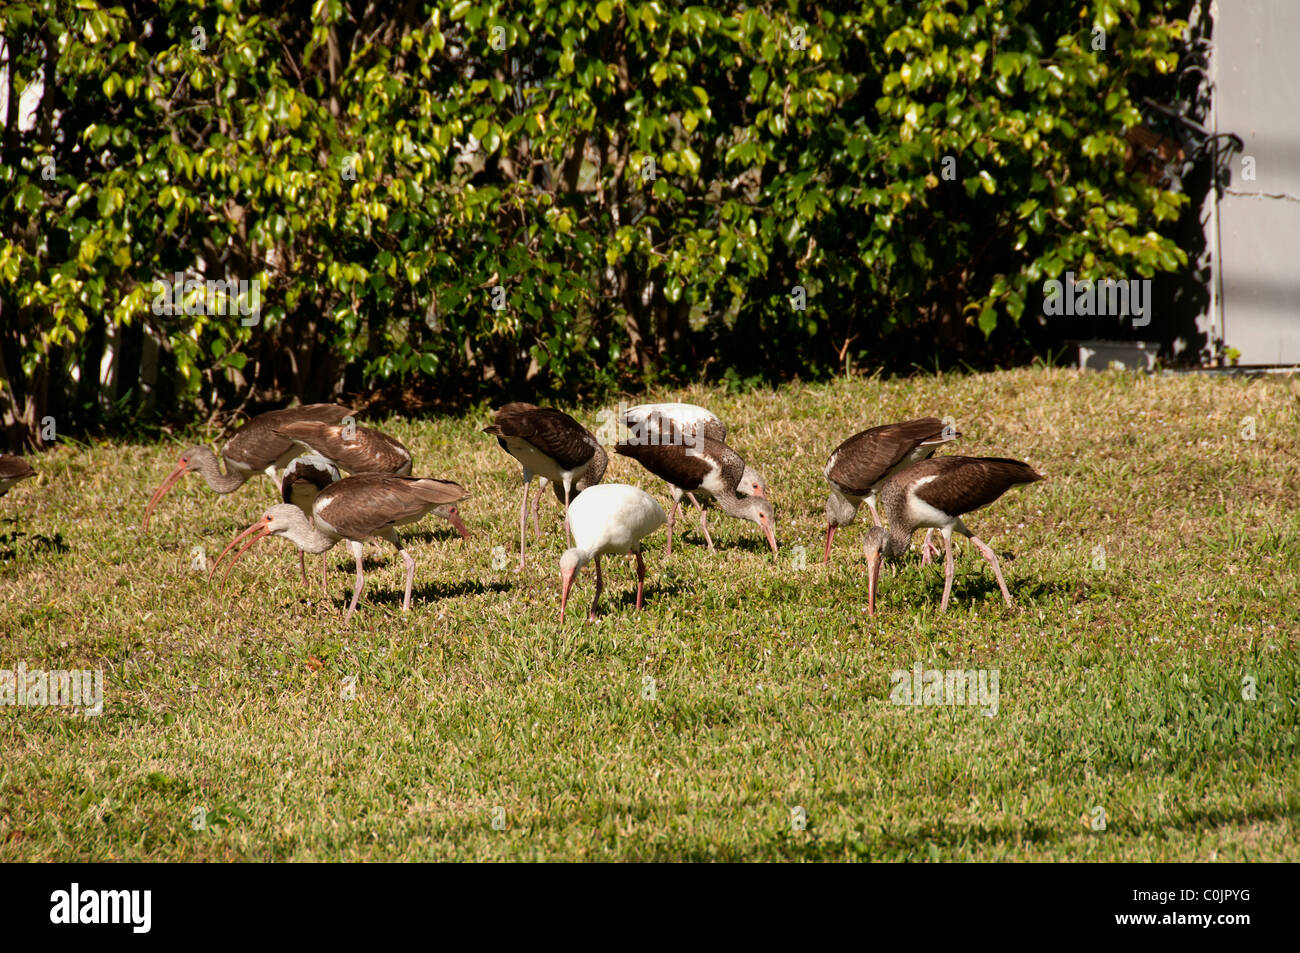 Ibis scavenging in lawn. Stock Photo